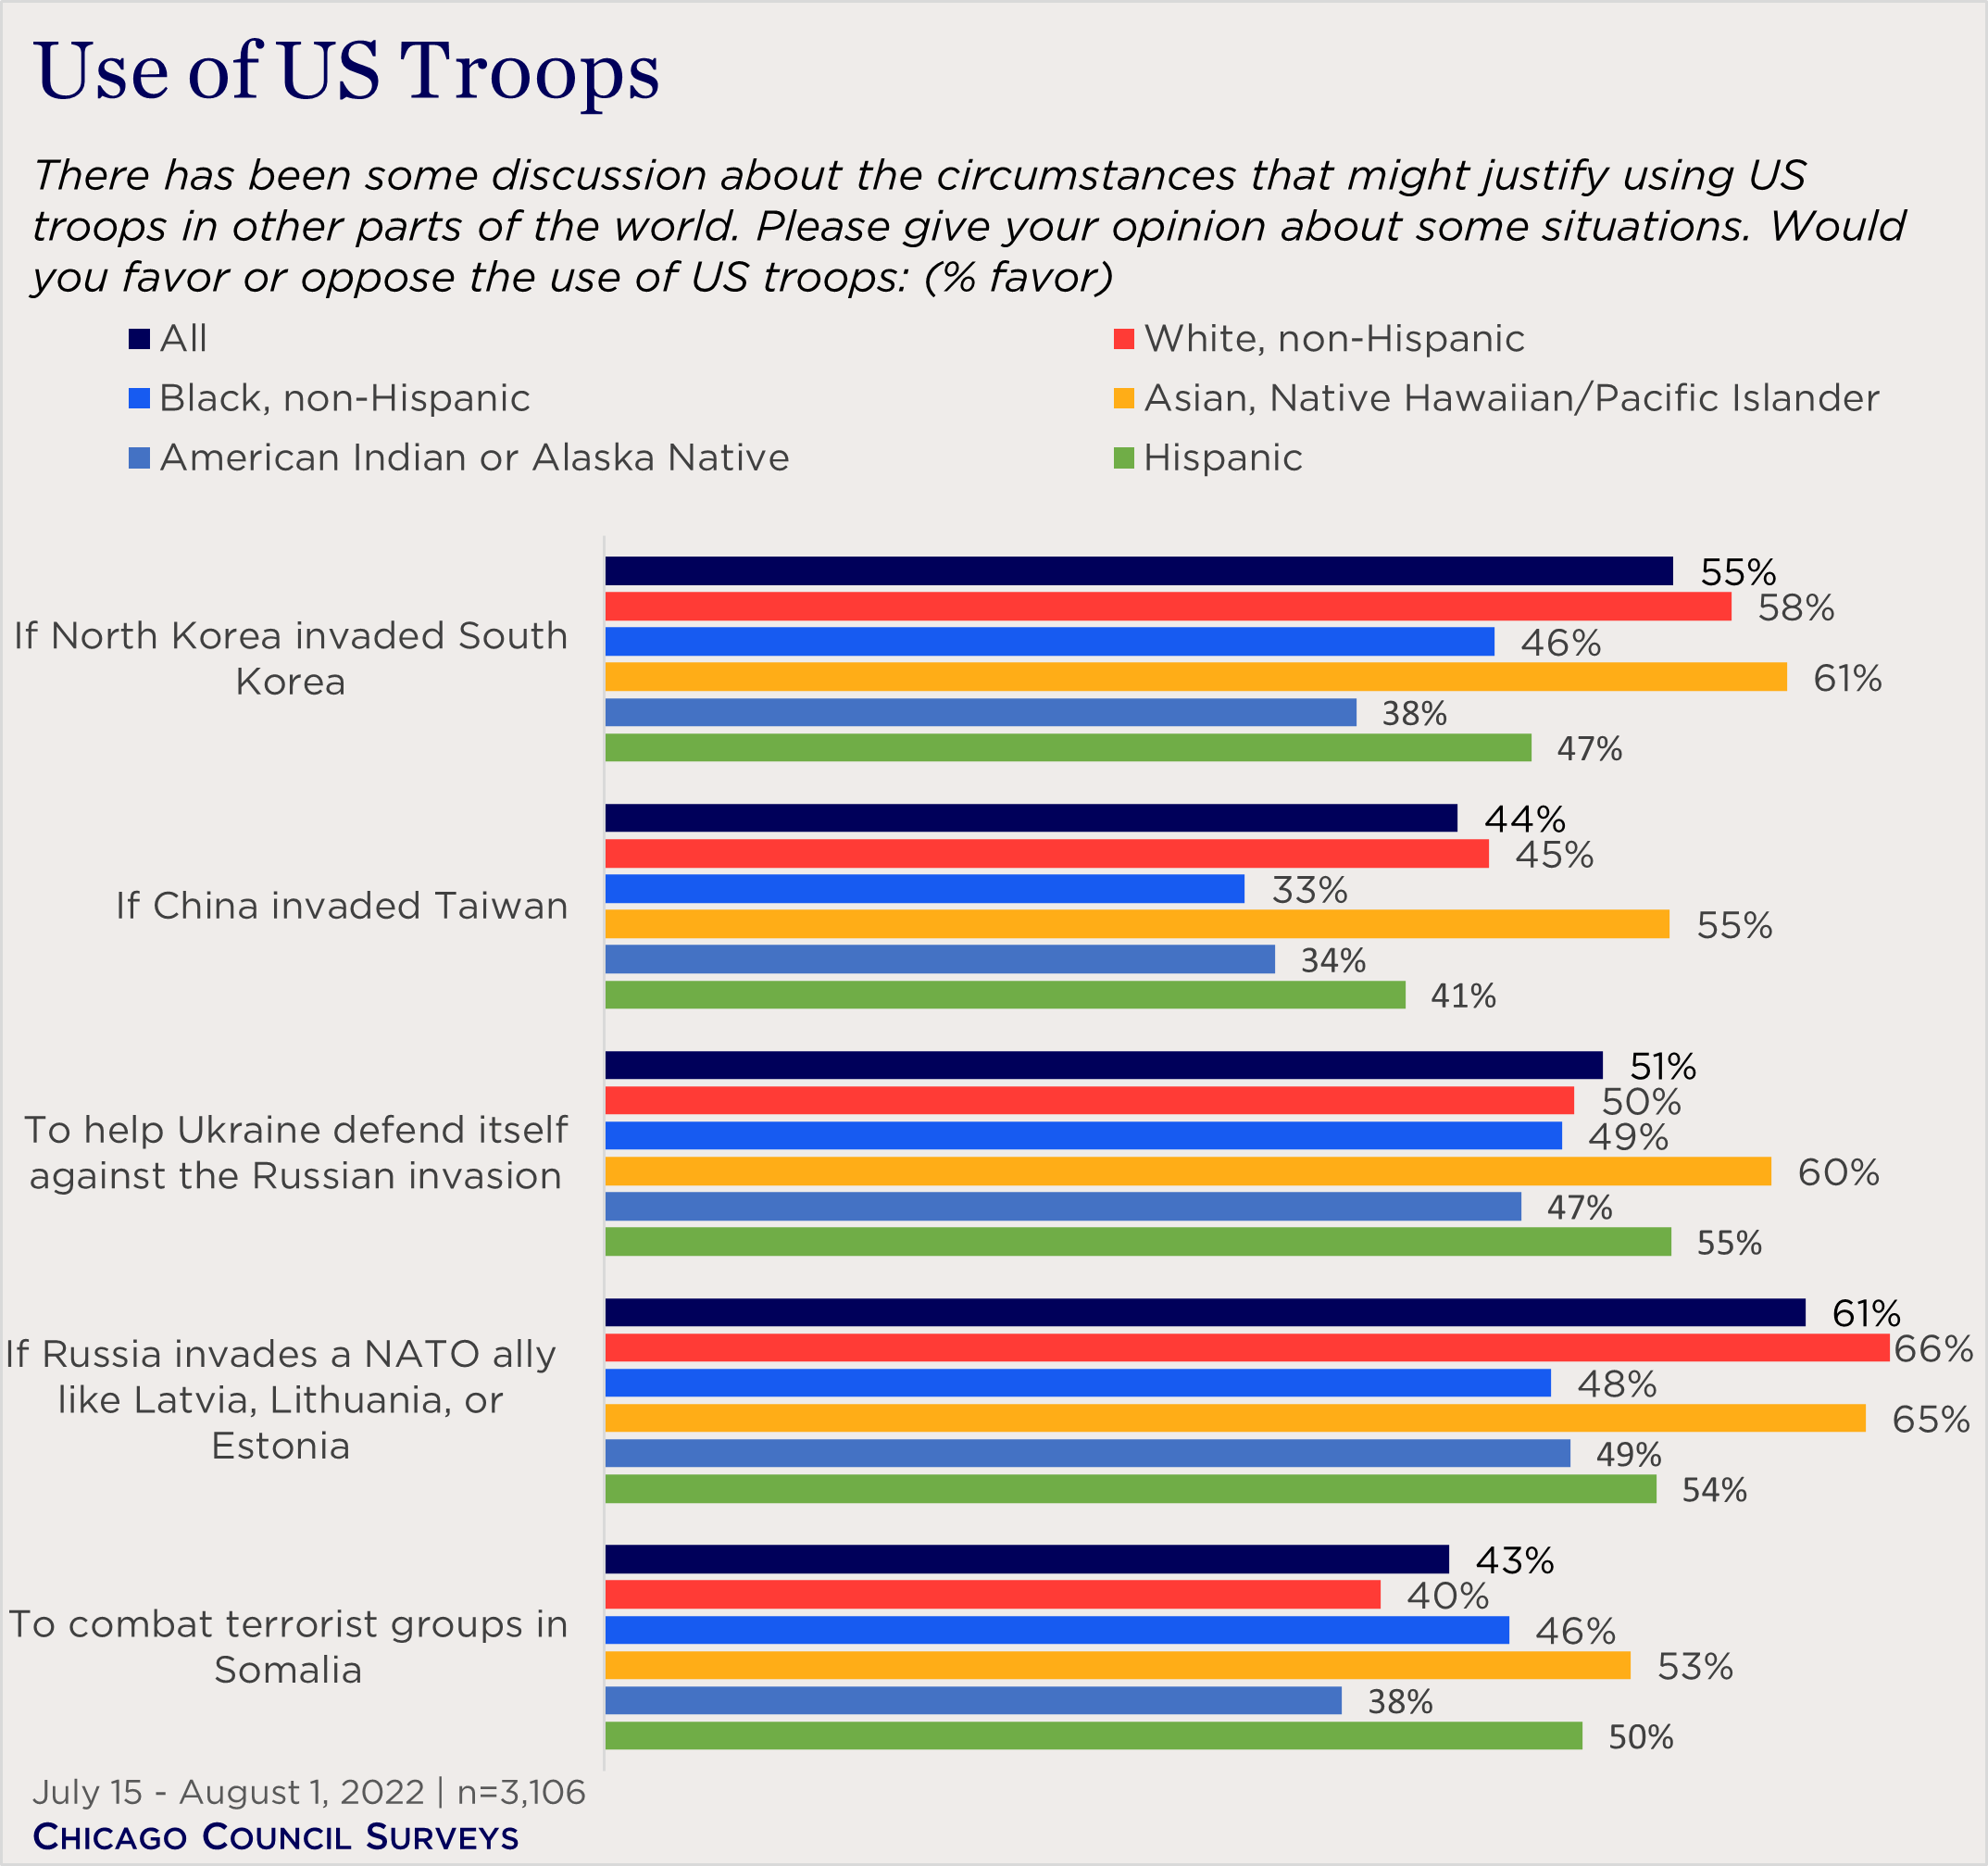 "bar chart showing views on use of force by race"